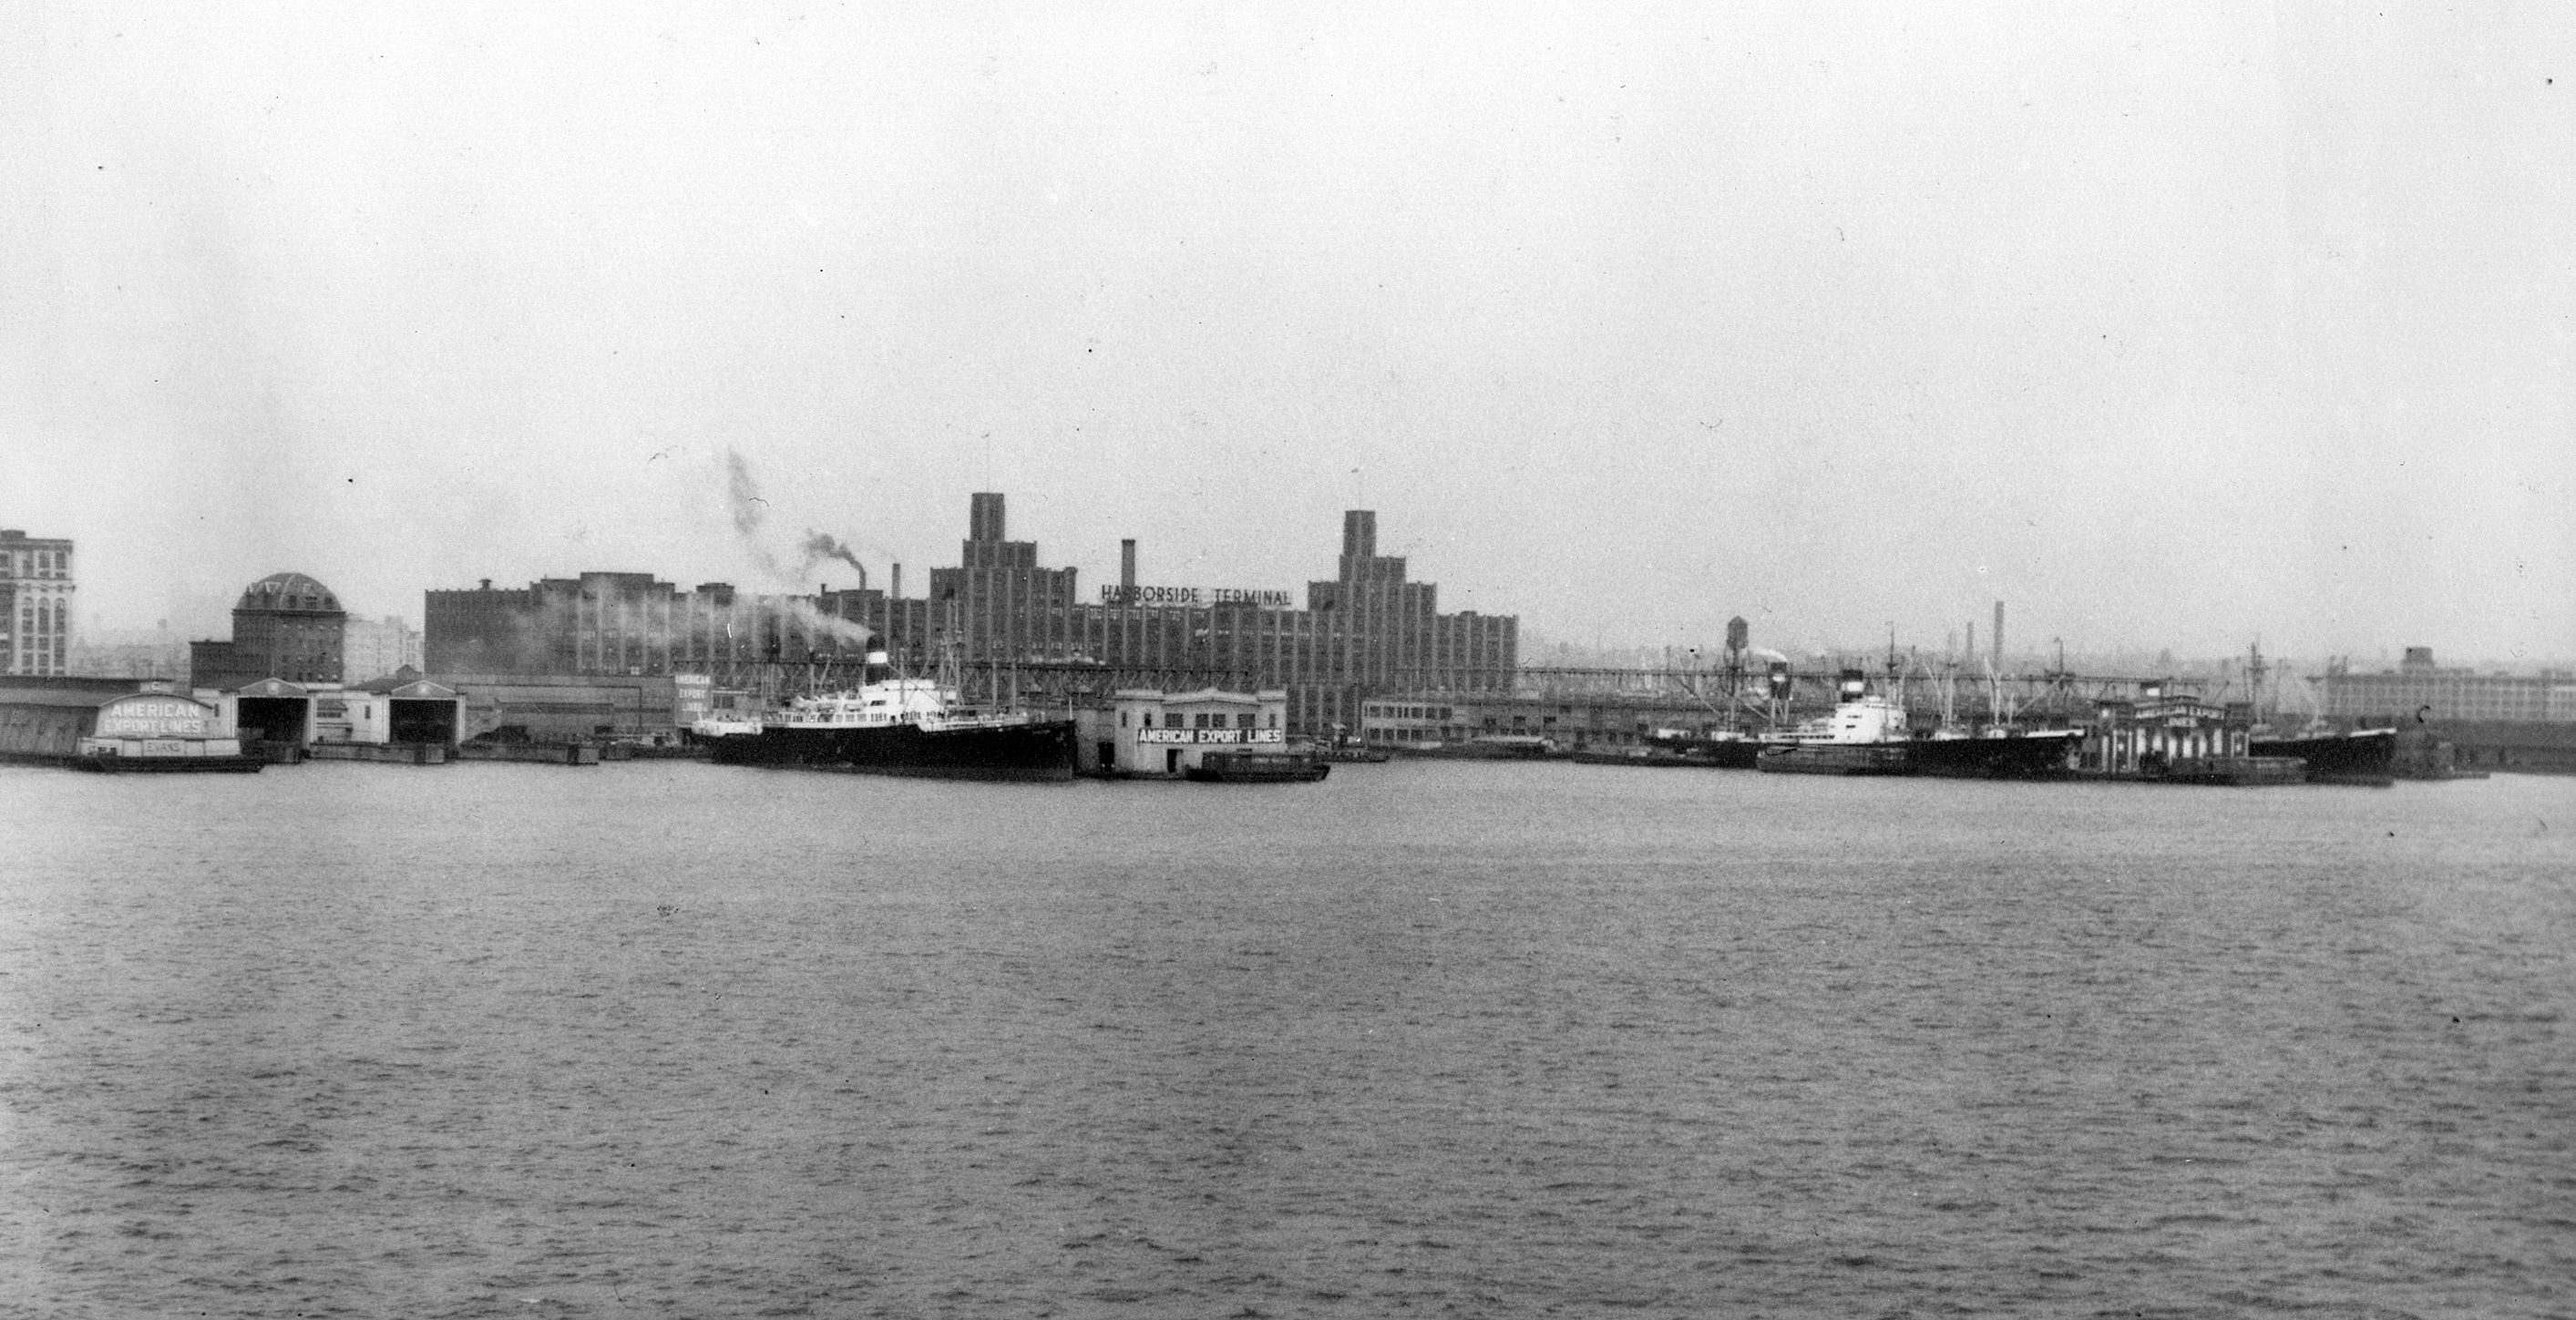 Port of New York shoreline. (CBP historical collections, 1949)